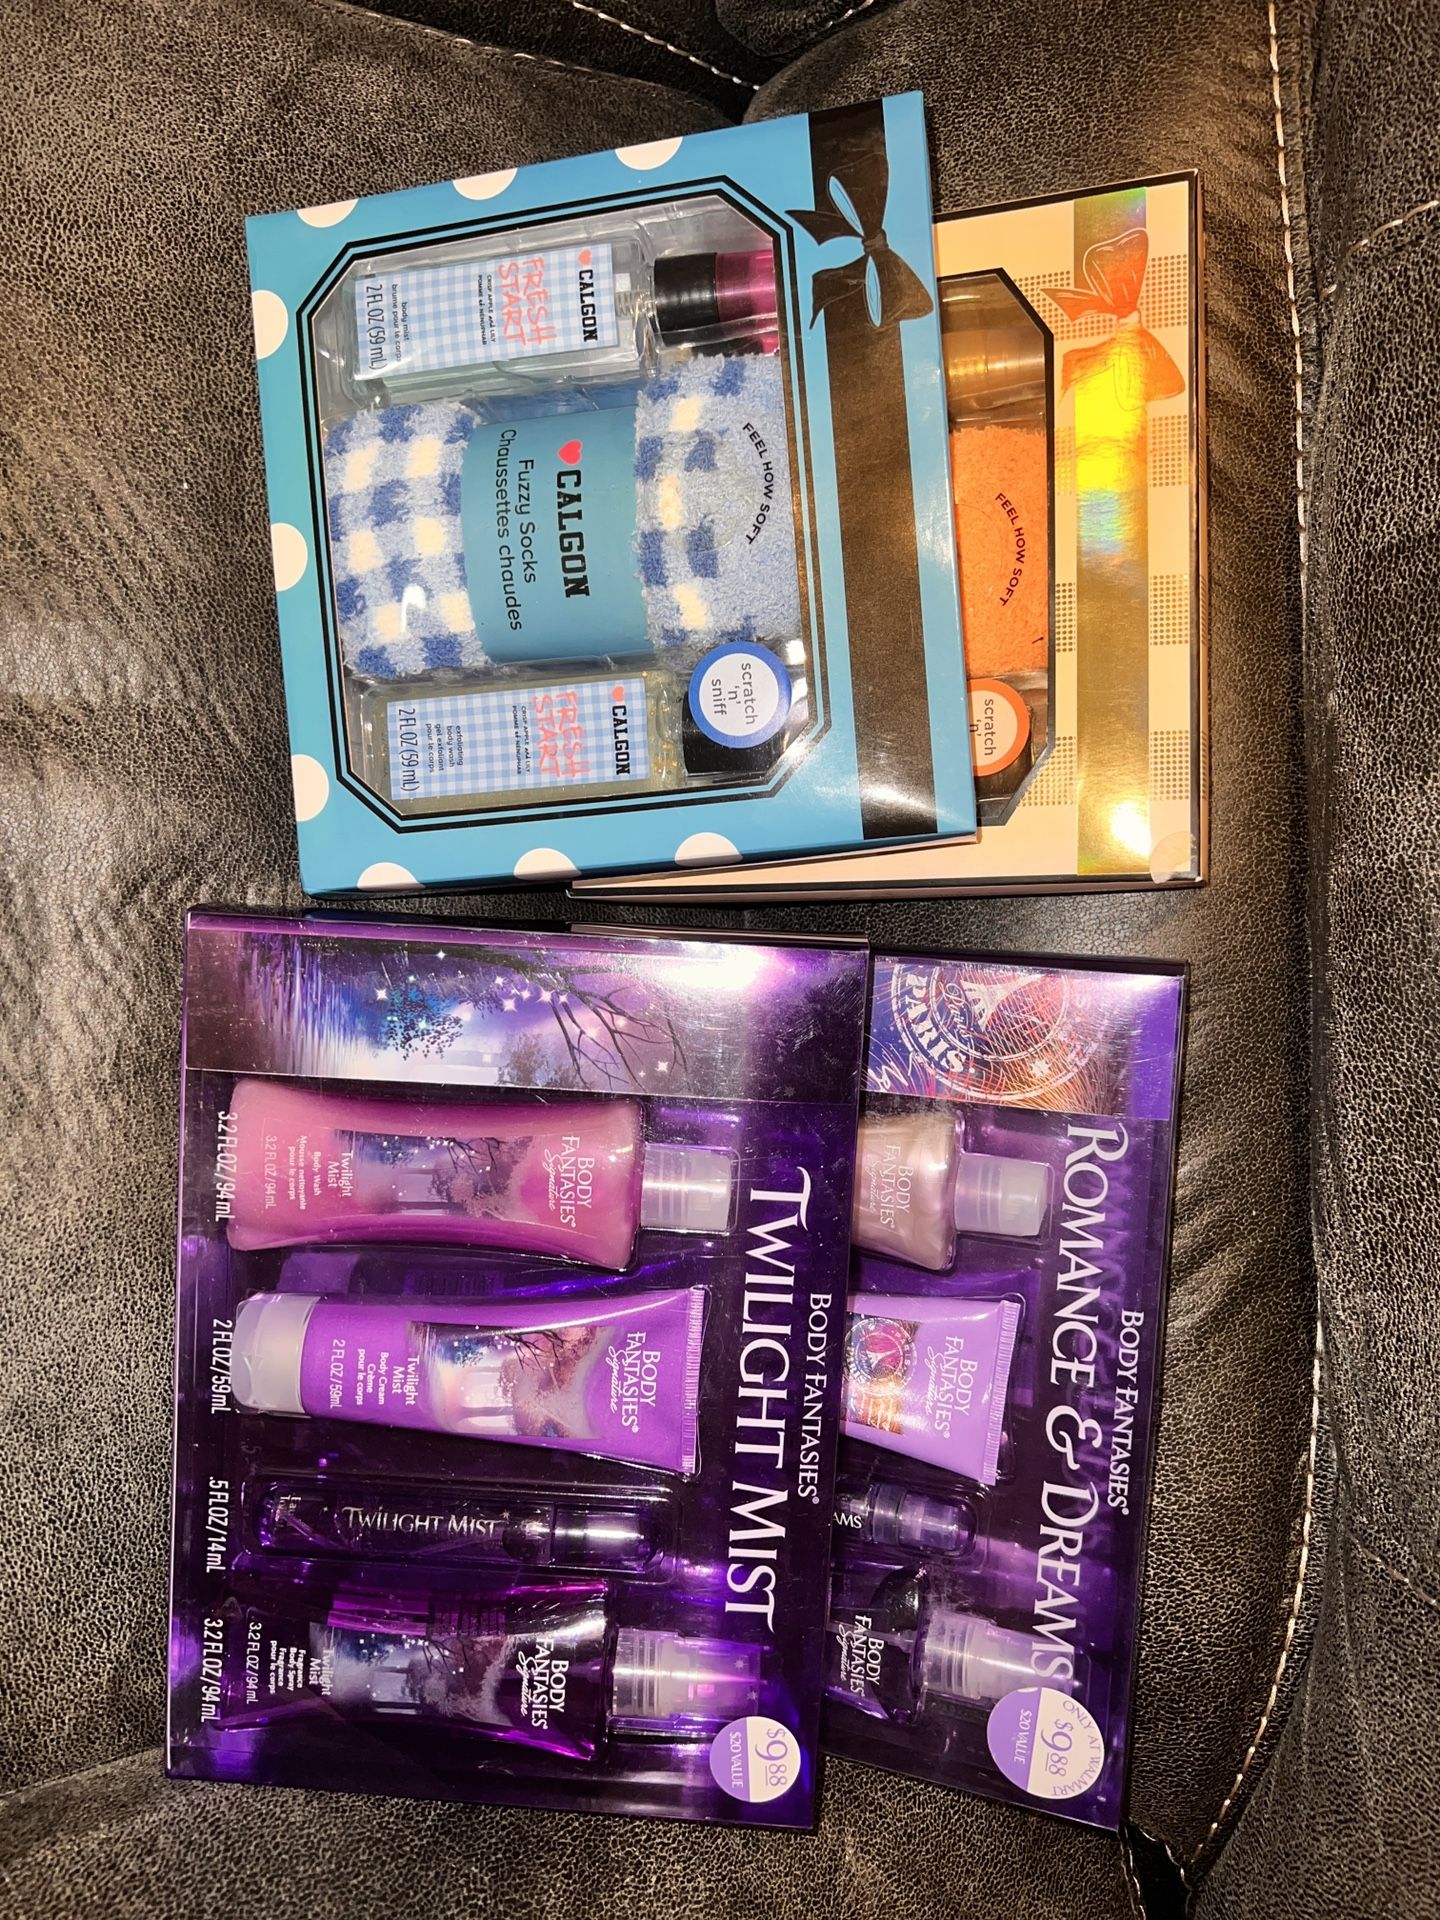 New Perfume Sets $10 For All